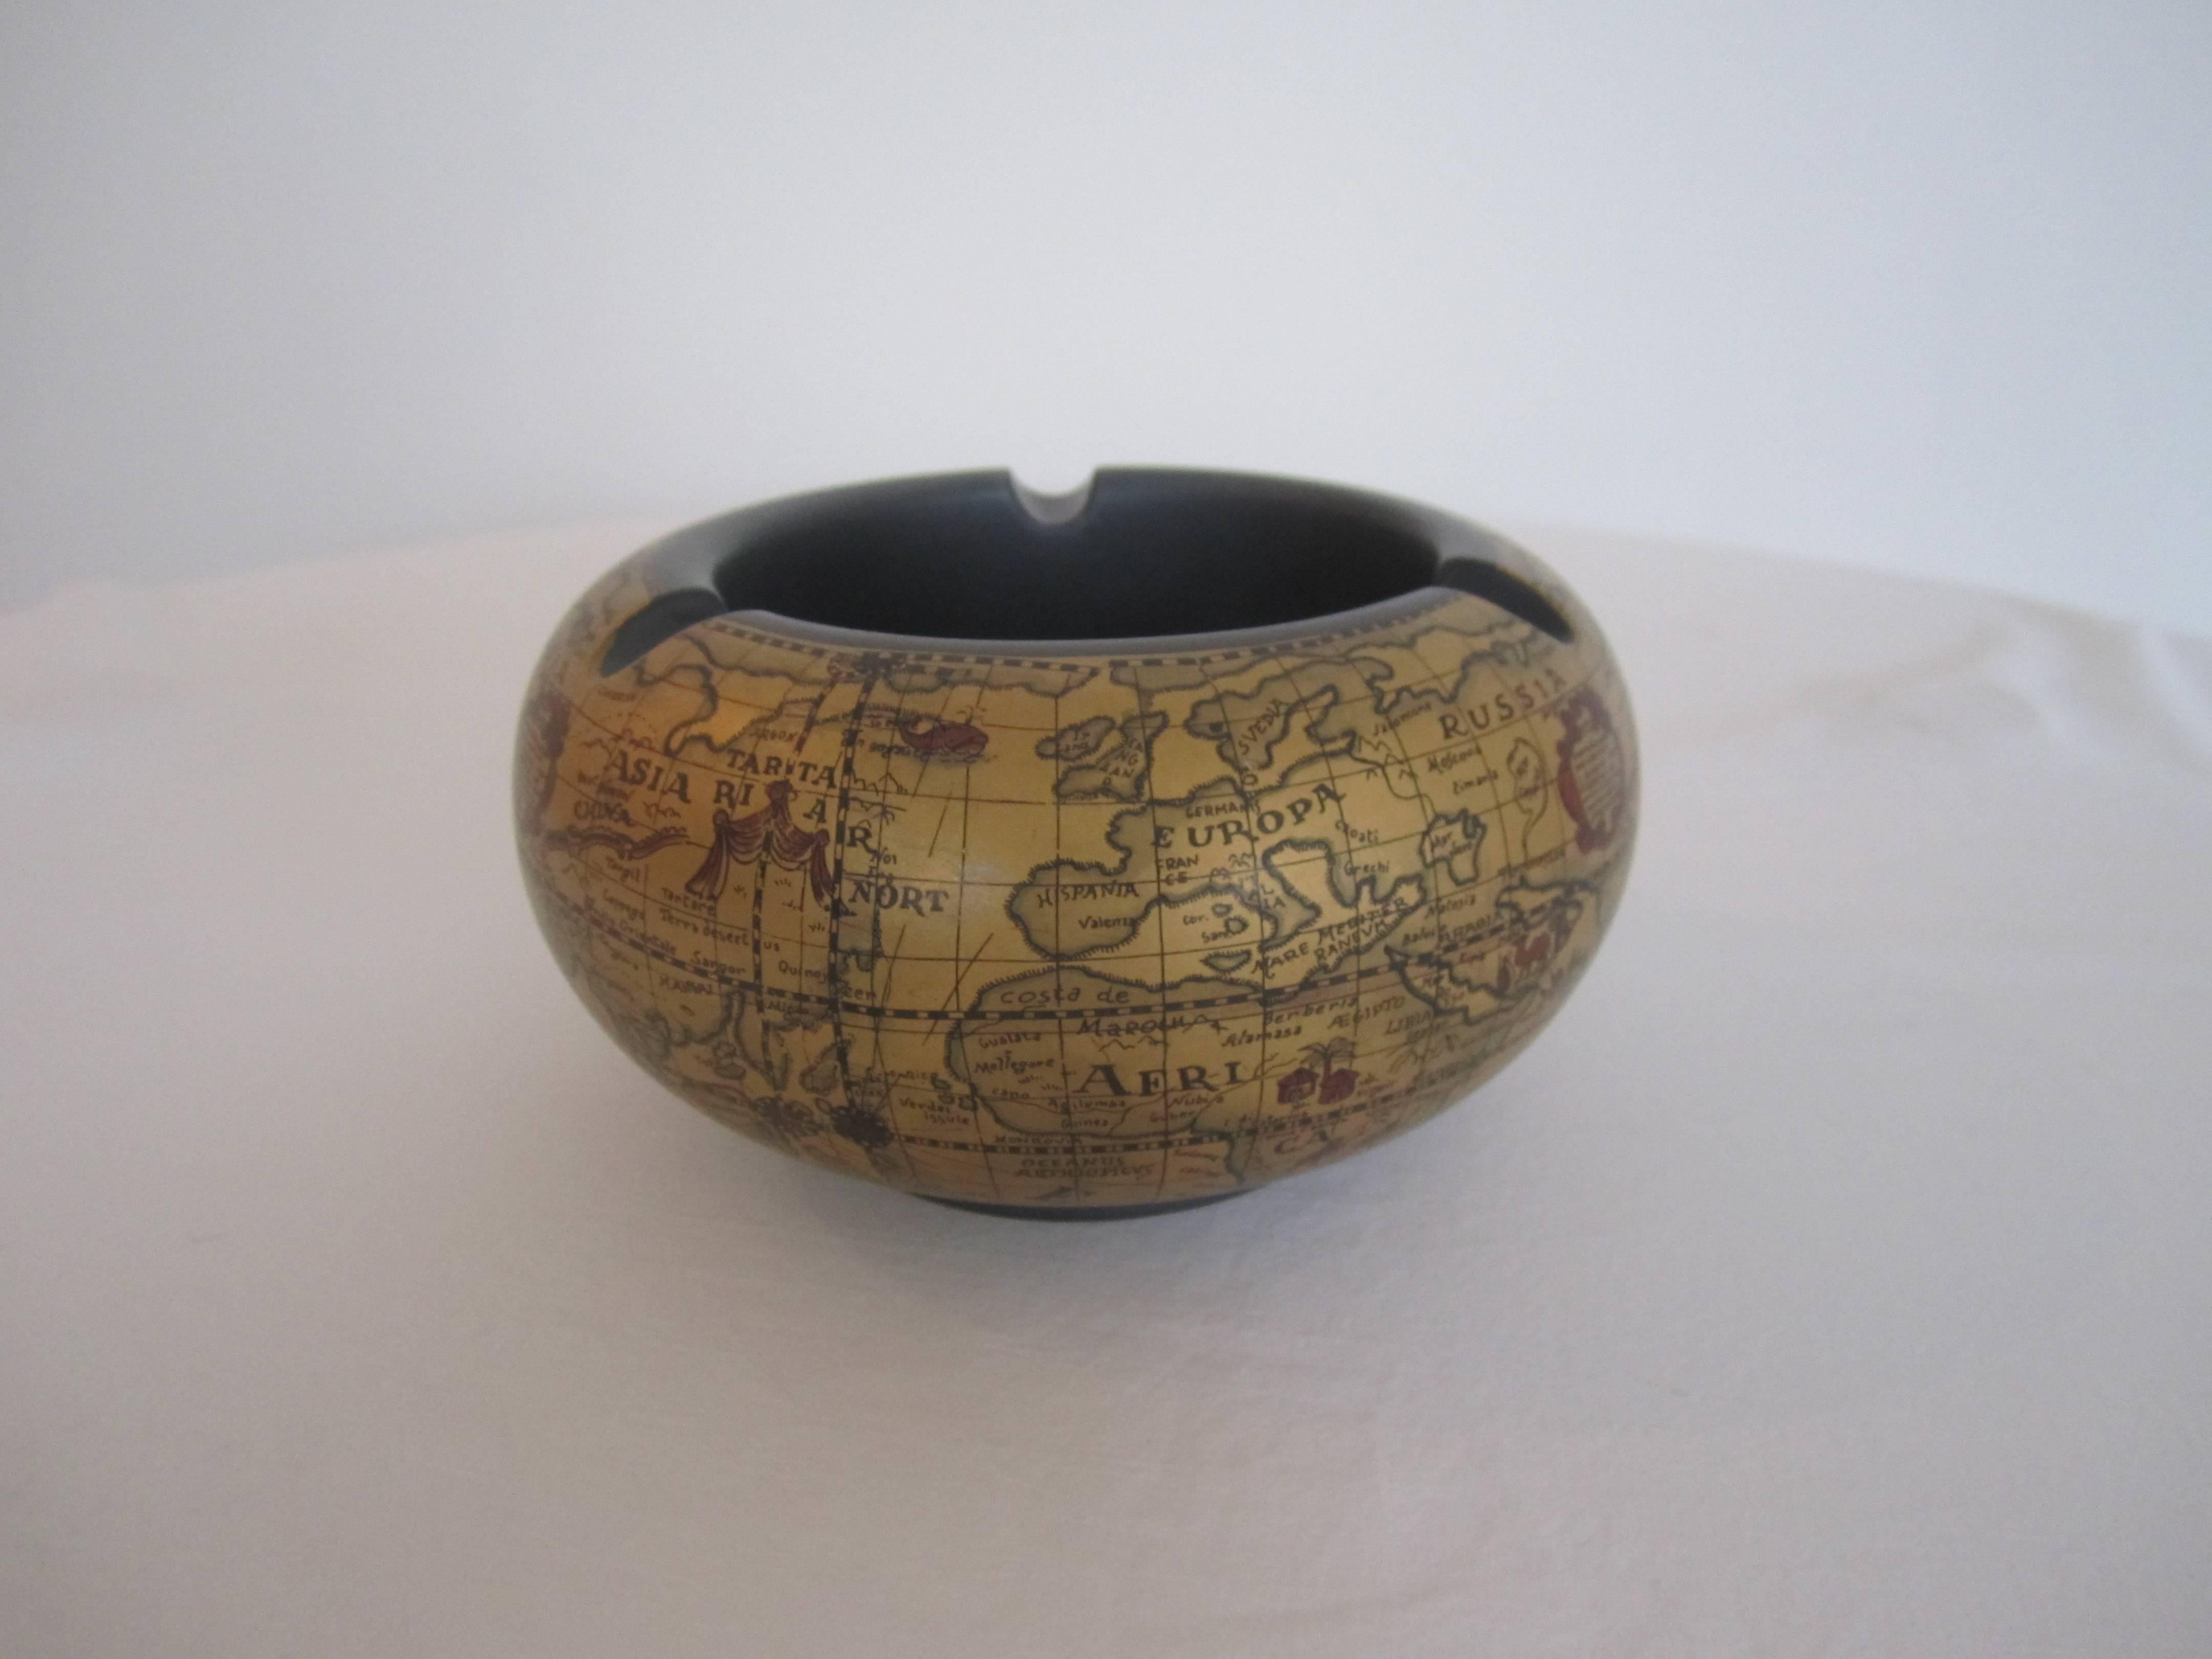 A vintage world globe ashtray or bowl, gold on the exterior with a world map and a dark grey interior. Marked, Made in Florence, Italy. Item available here online, and by request, can be made available at my showcase space in the Showplace Antique +